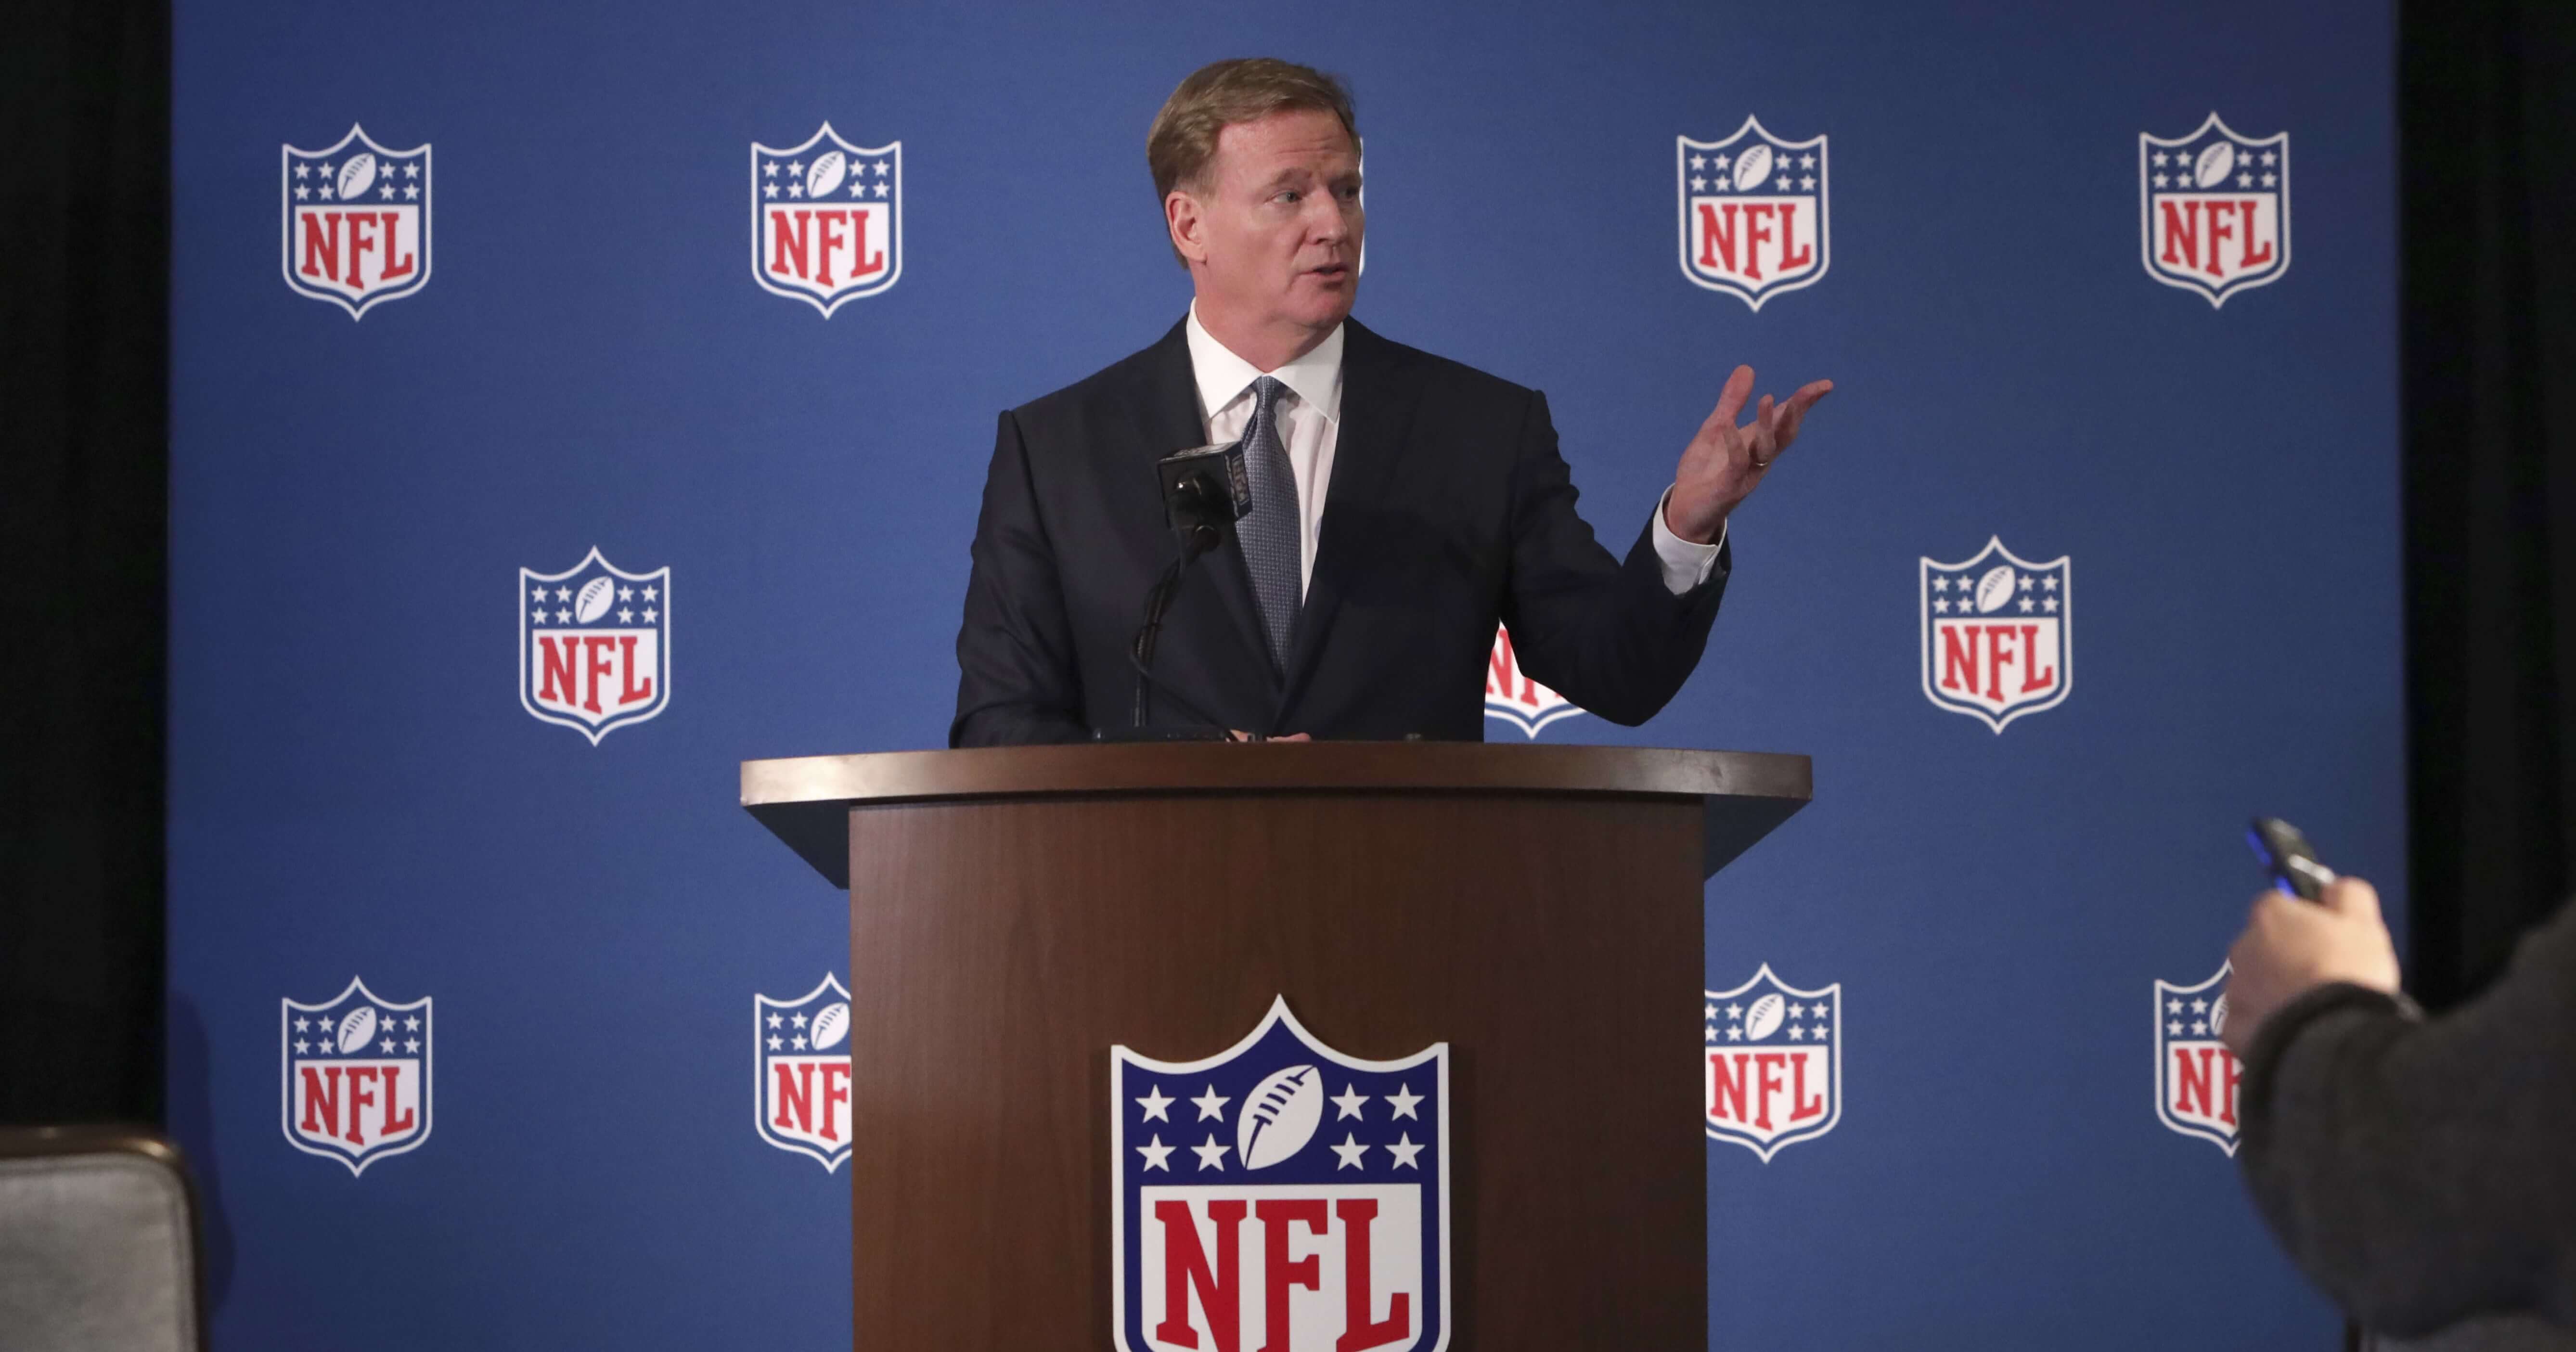 NFL Commissioner Roger Goodell speaks during a news conference after the leagues' meeting in Irving, Texas, on Wednesday